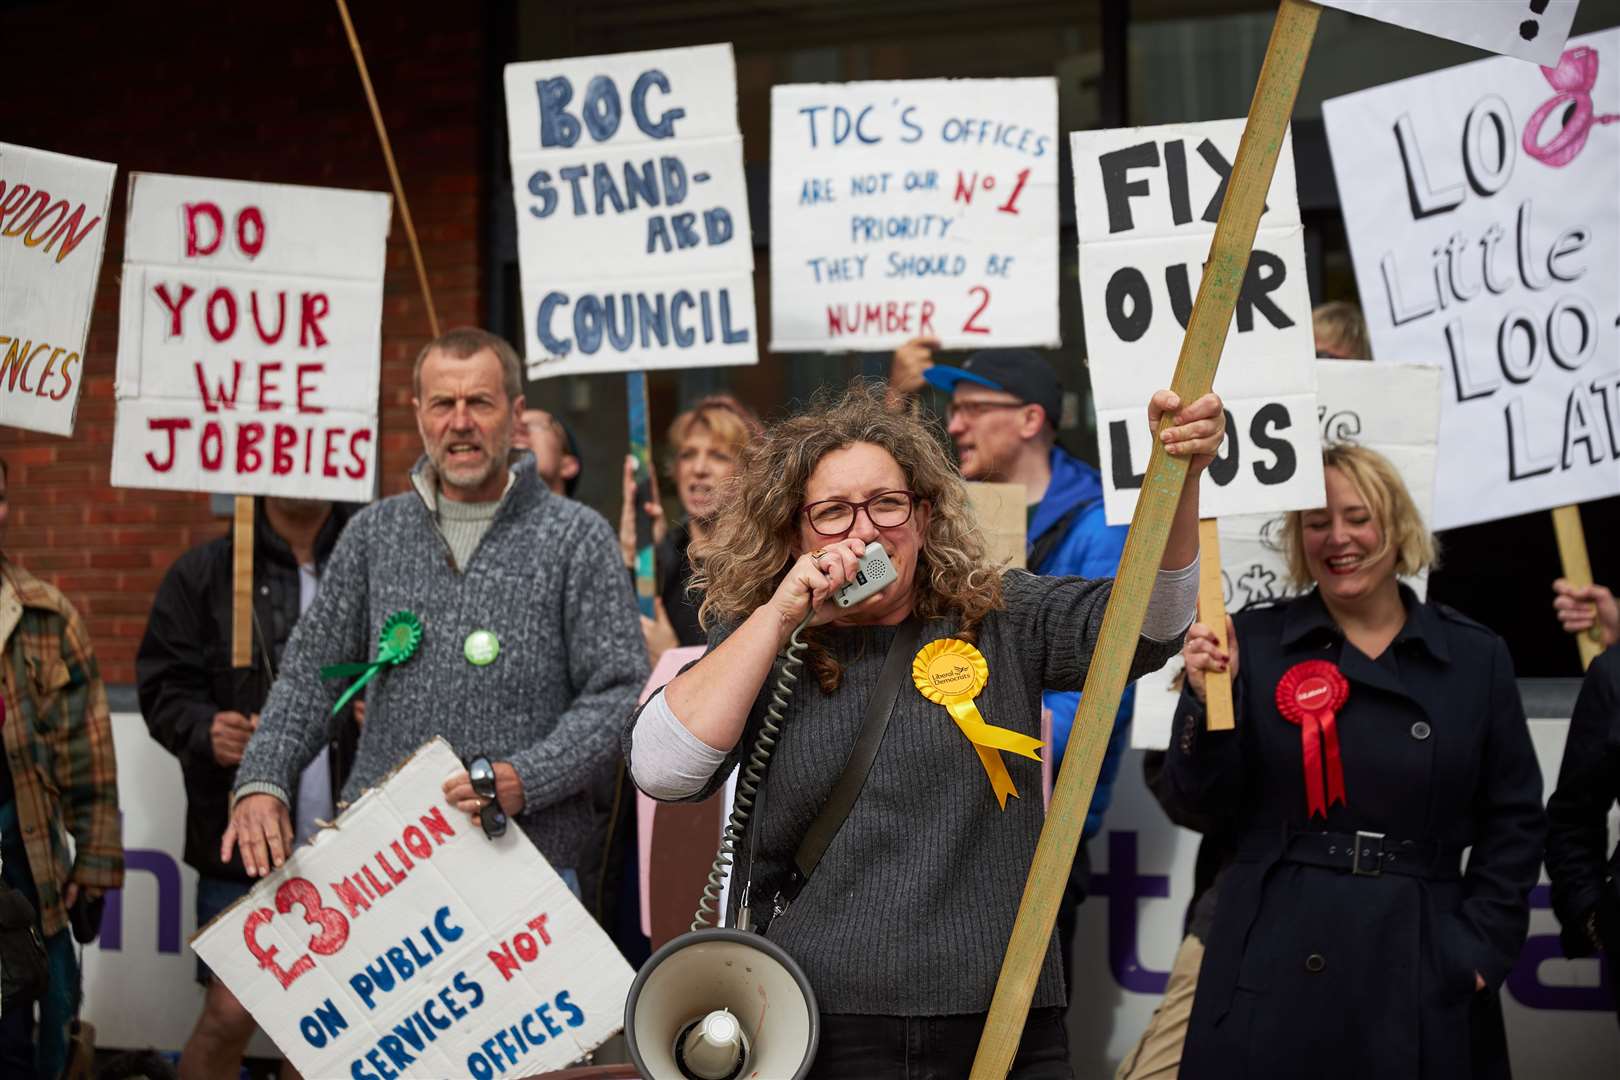 Protestors outside the Thanet council offices on Thursday. Picture credit: Joel Knight (9153931)